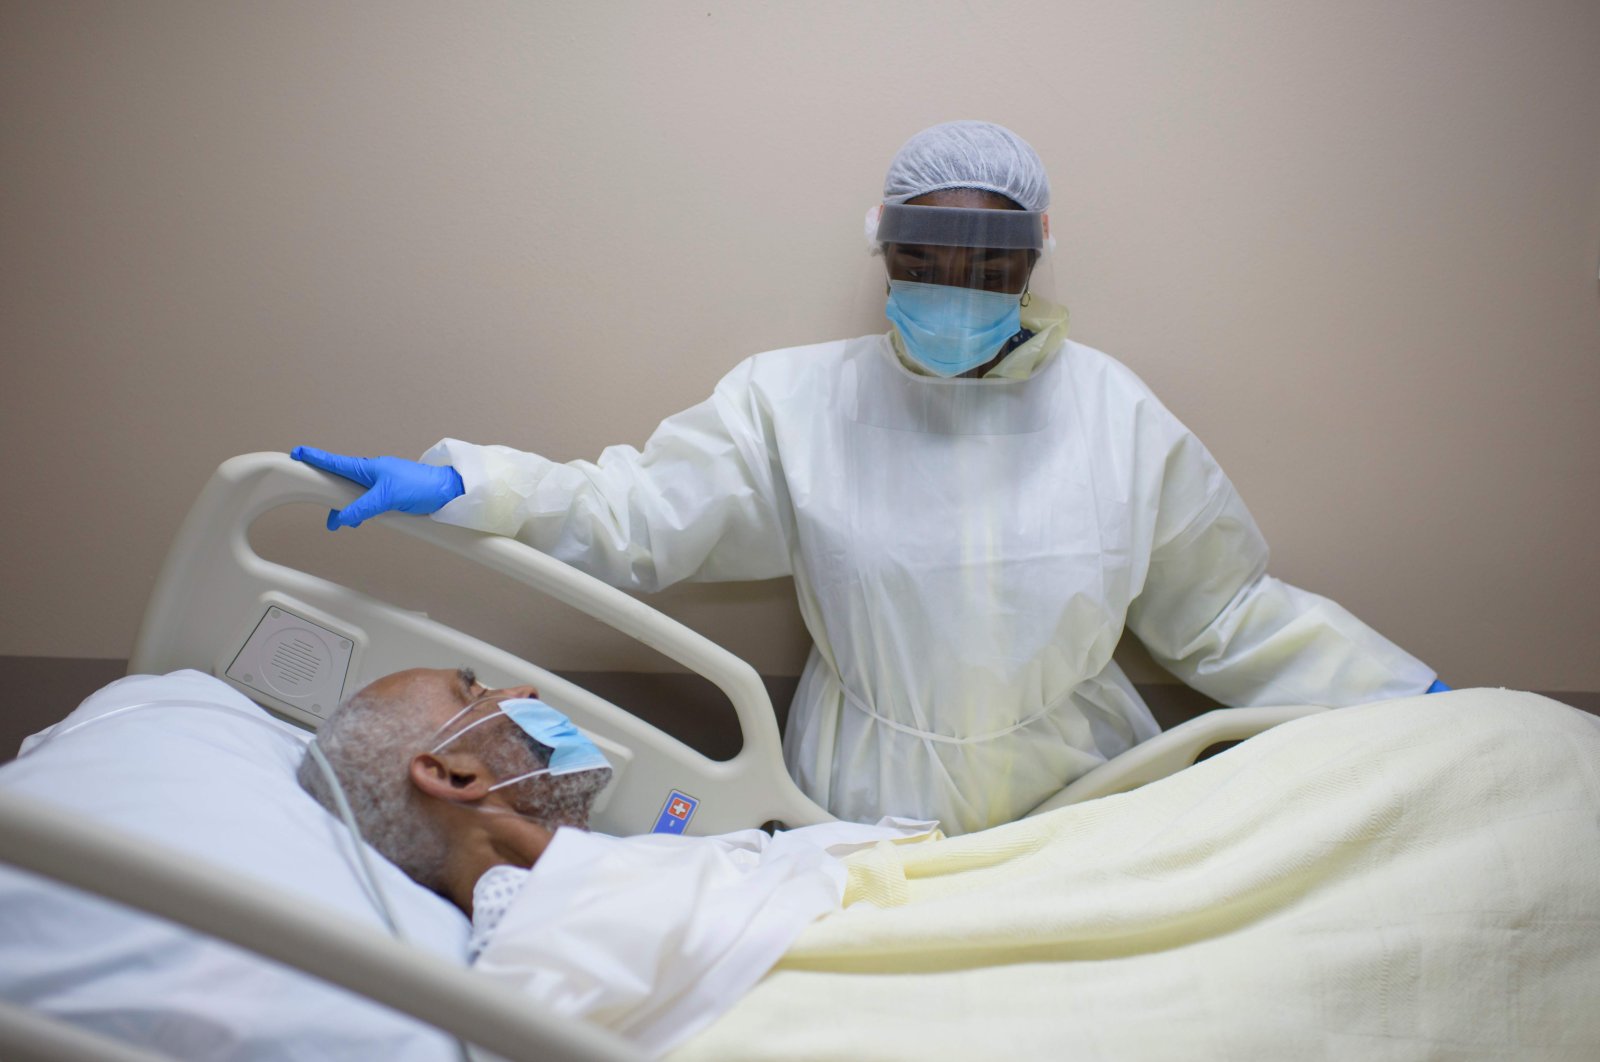 A healthcare worker tends to a patient in the COVID-19 unit at United Memorial Medical Center in Houston, Texas, US on July 2, 2020. (AFP Photo)